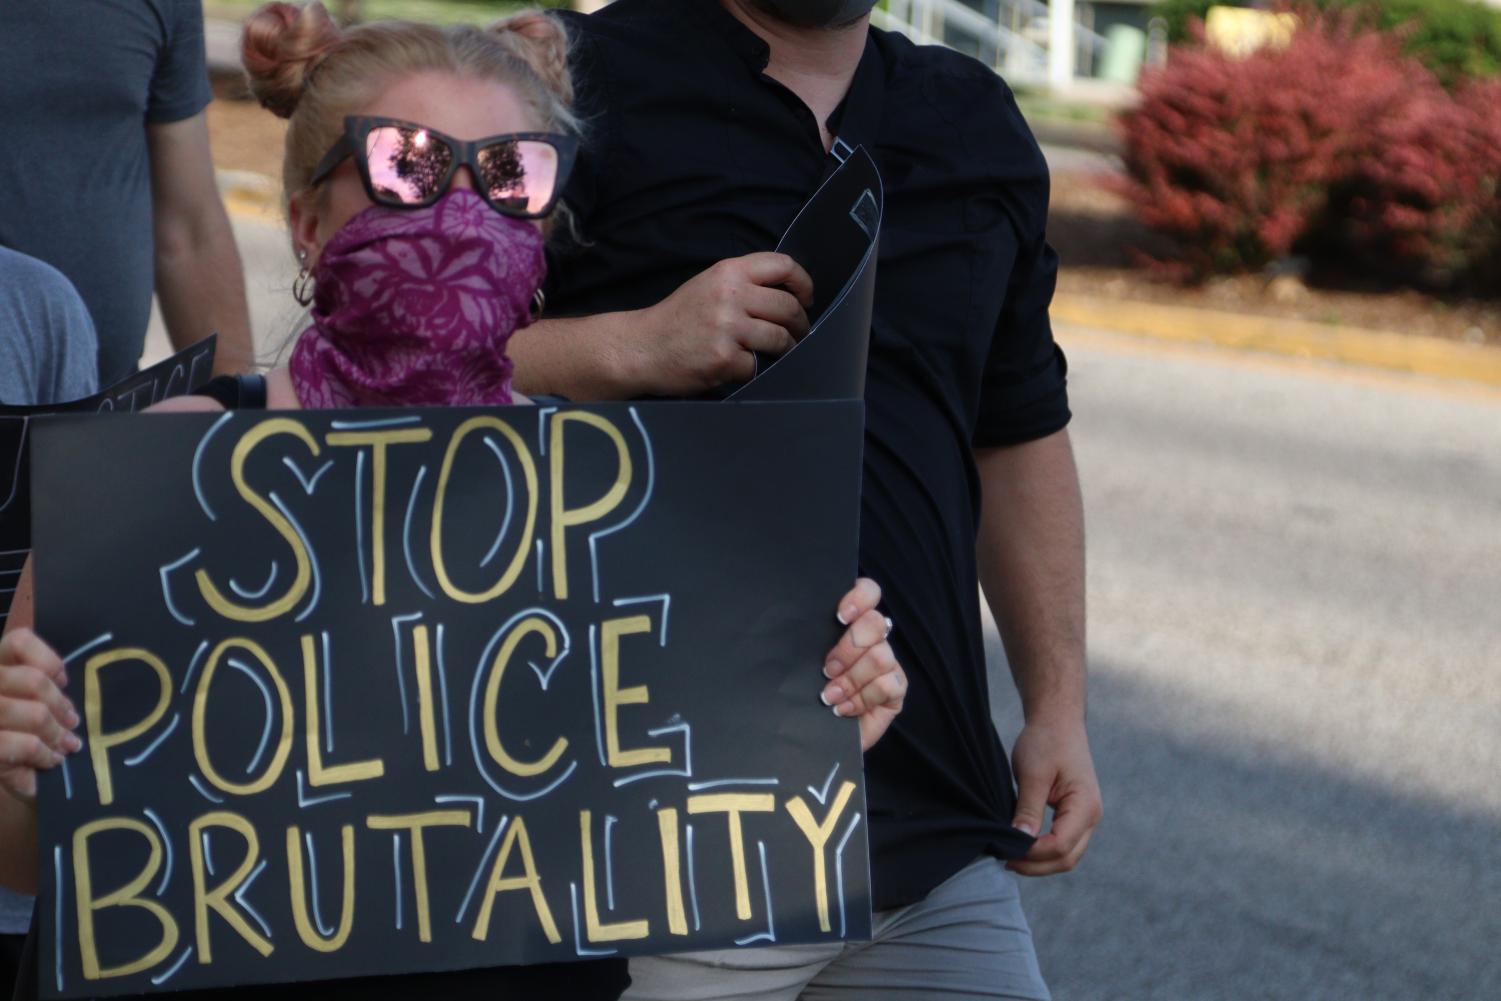 Photo+Gallery%3A+Black+Lives+Matter+Protest